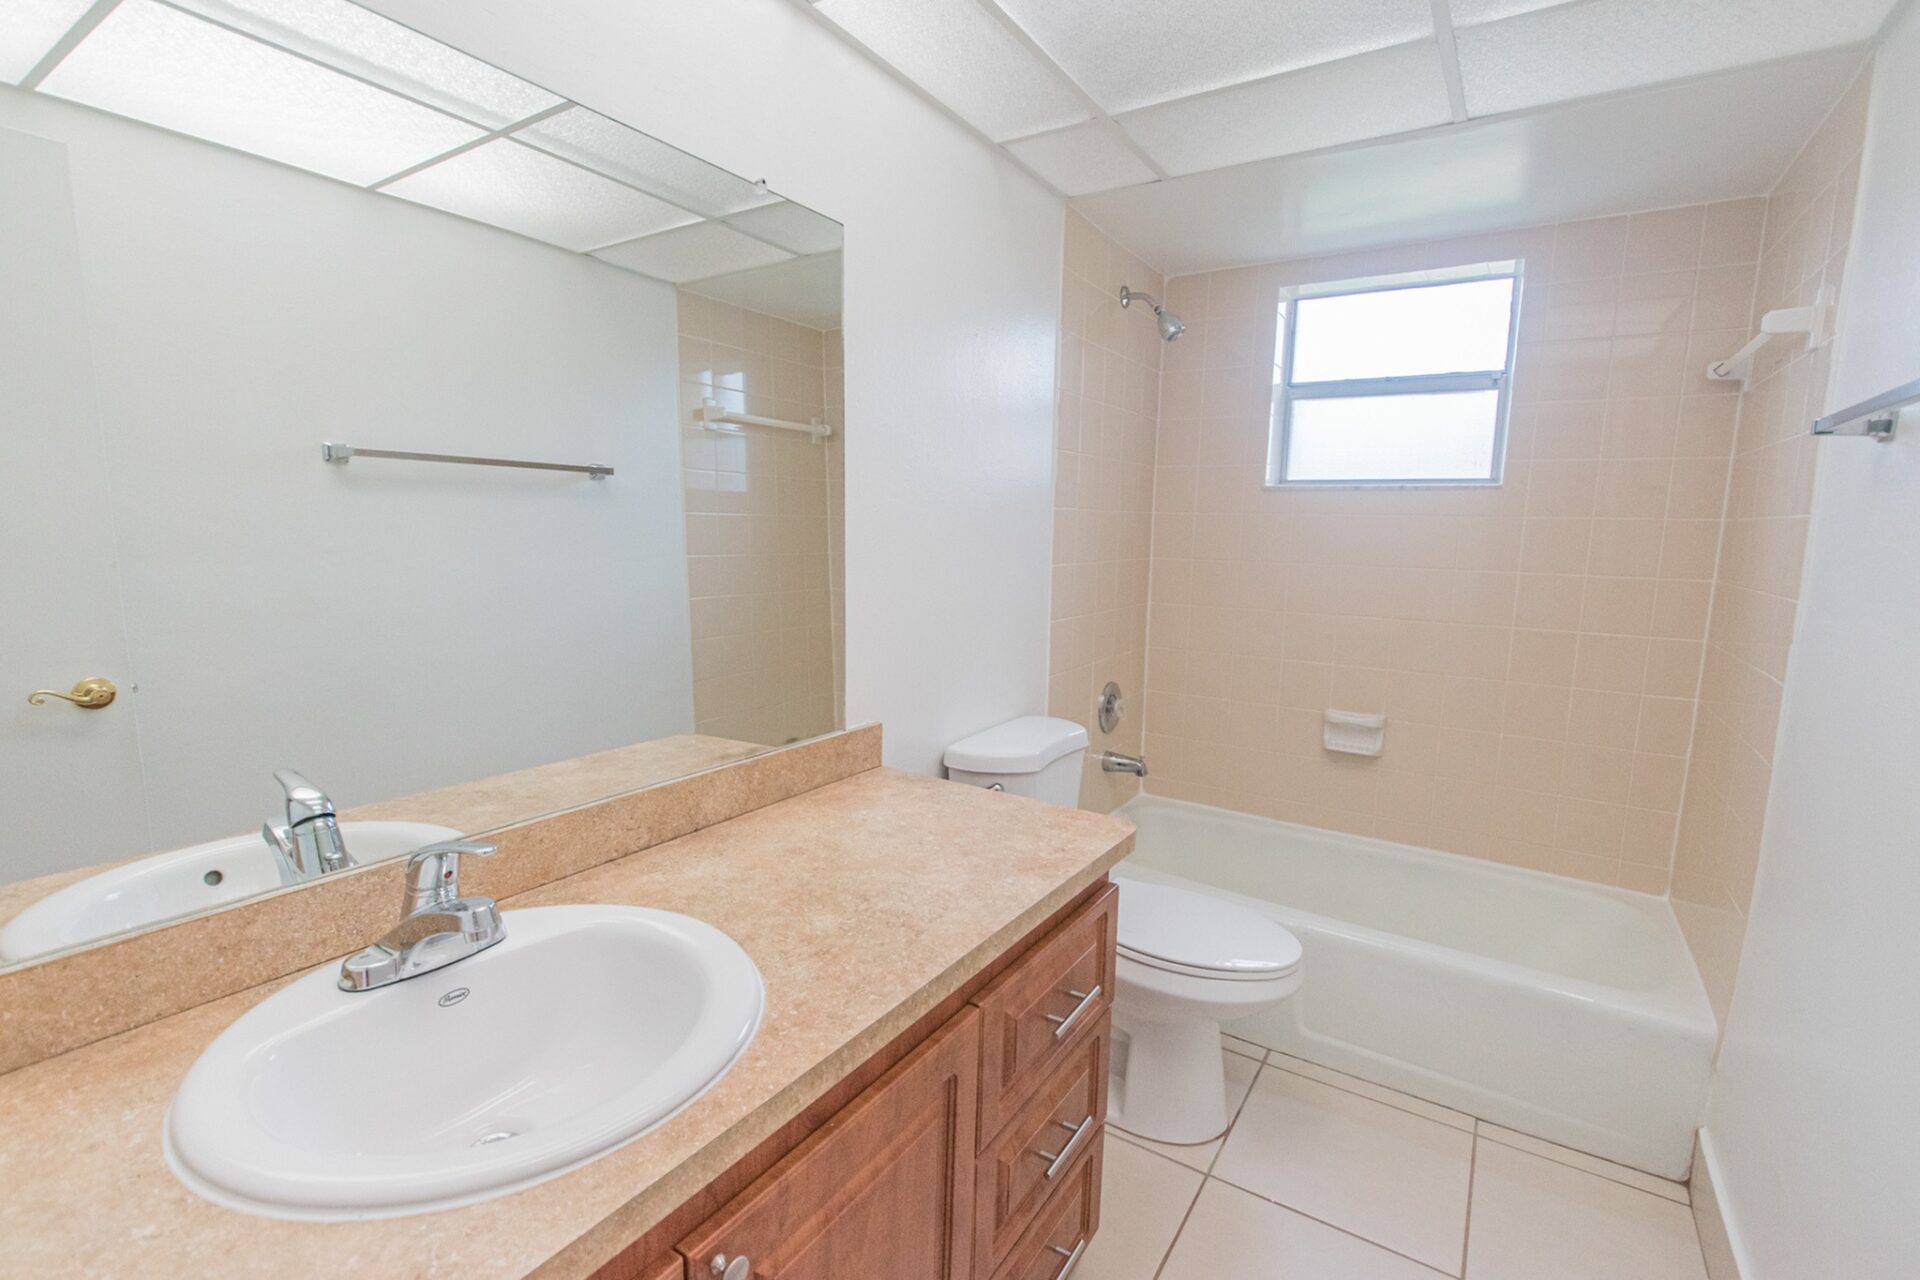 Large mirror with a sink, wooden cabinets, a toilet, and a bathtub in a bathroom.